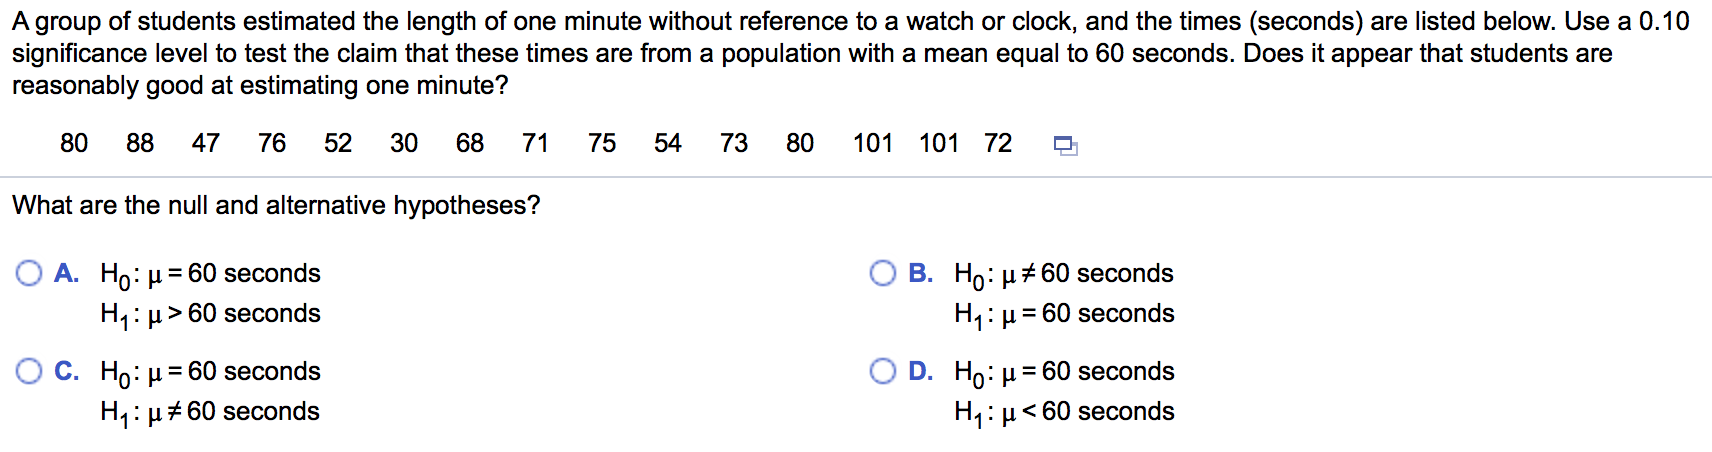 A group of students estimated the length of one minute without reference to a watch or clock, and the times (seconds) are listed below. Use a 0.10
significance level to test the claim that these times are from a population with a mean equal to 60 seconds. Does it appear that students are
reasonably good at estimating one minute?
88
47
76
52
30
68
71
75
54
73
80
101 101 72
What are the null and alternative hypotheses?
В. Но: и260 seconds
H:µ= 60 seconds
A. Ho: µ= 60 seconds
%3D
H1: µ> 60 seconds
С. Но н
O D. Ho: µ= 60 seconds
H: µ< 60 seconds
= 60 seconds
%3D
H1: µ#60 seconds
